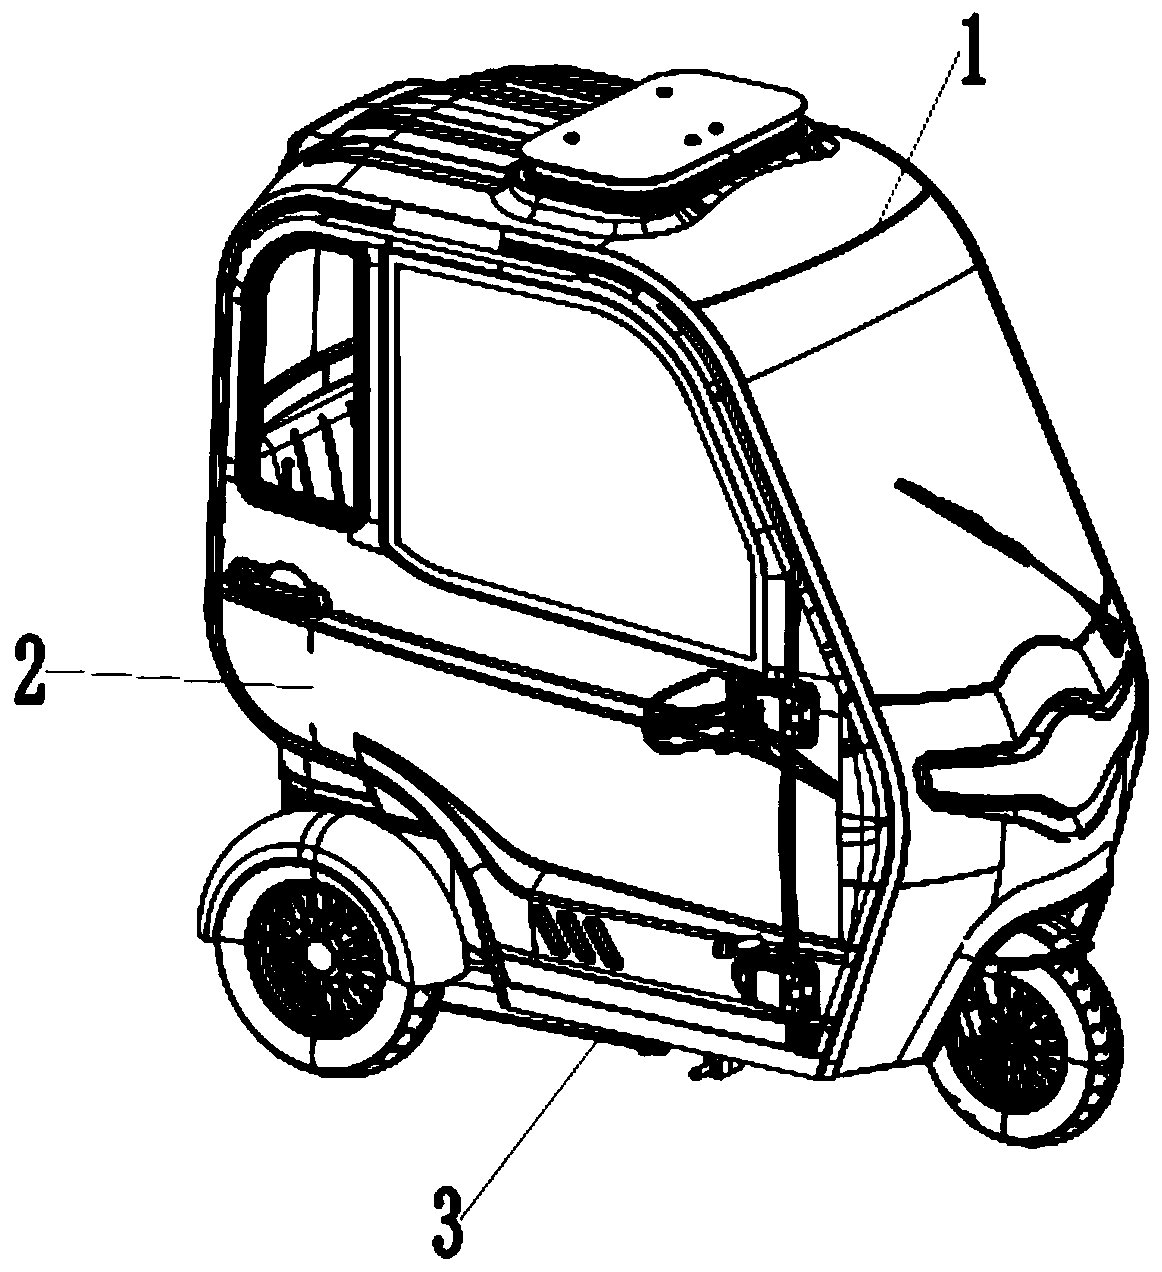 Rice grain type tricycle with hood